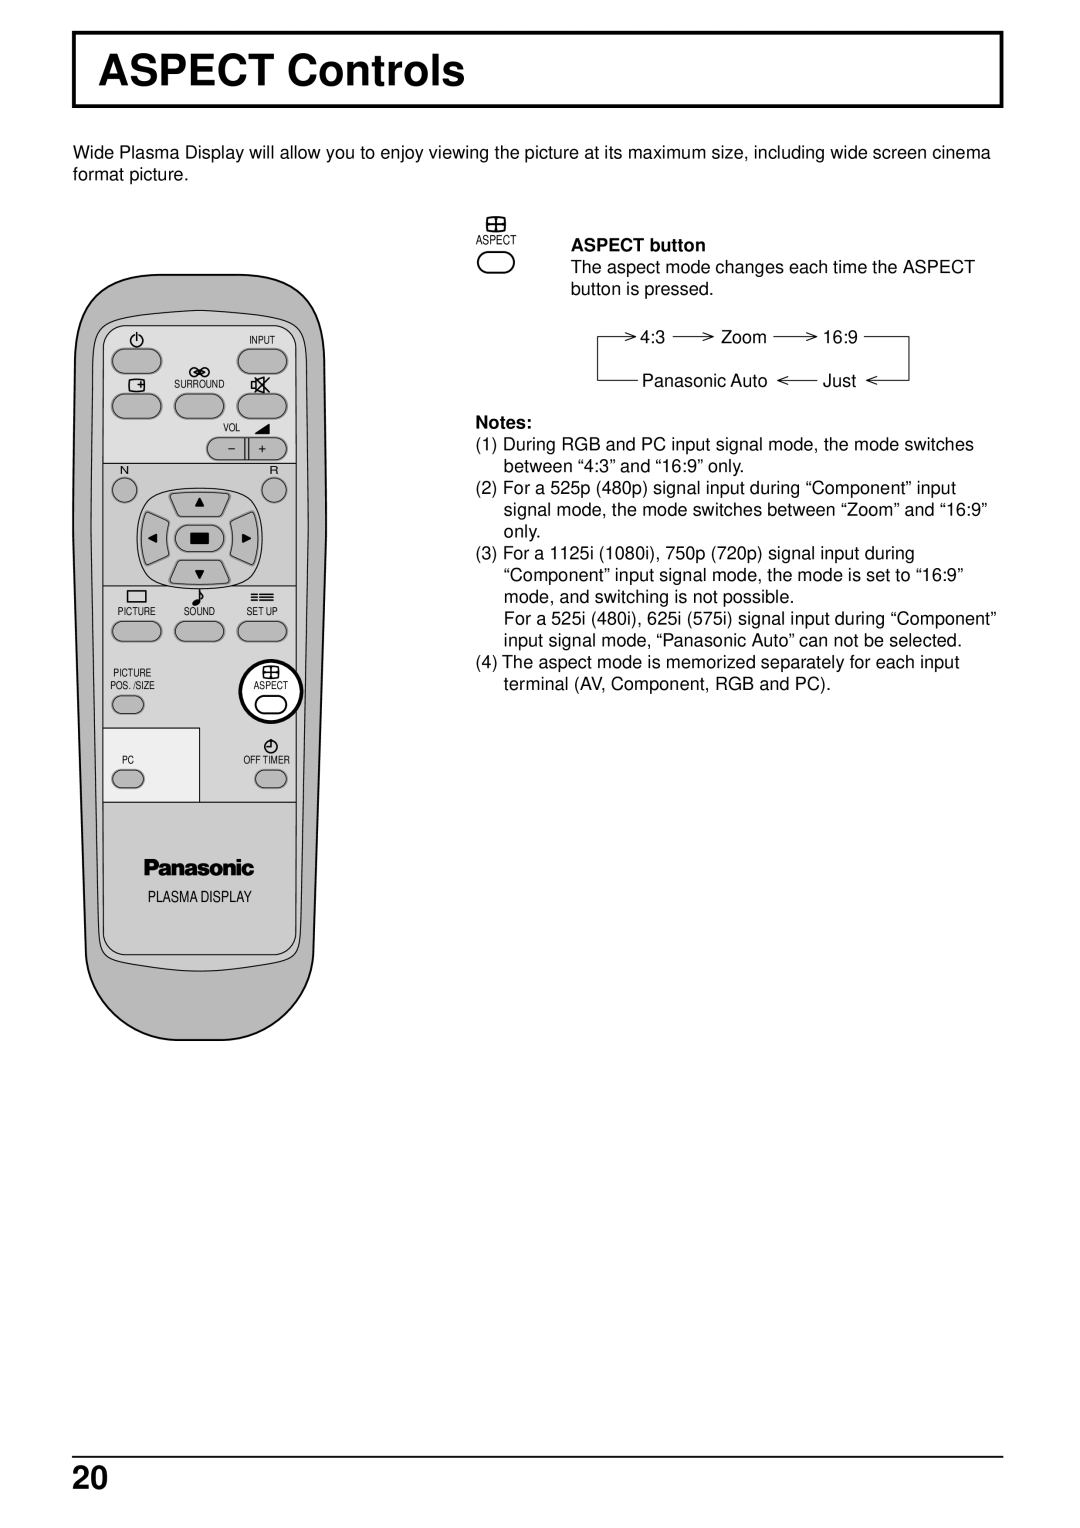 Panasonic TH-42PWD3, TH-42PW3 operating instructions Aspect Controls, Aspect mode changes each time the Aspect 